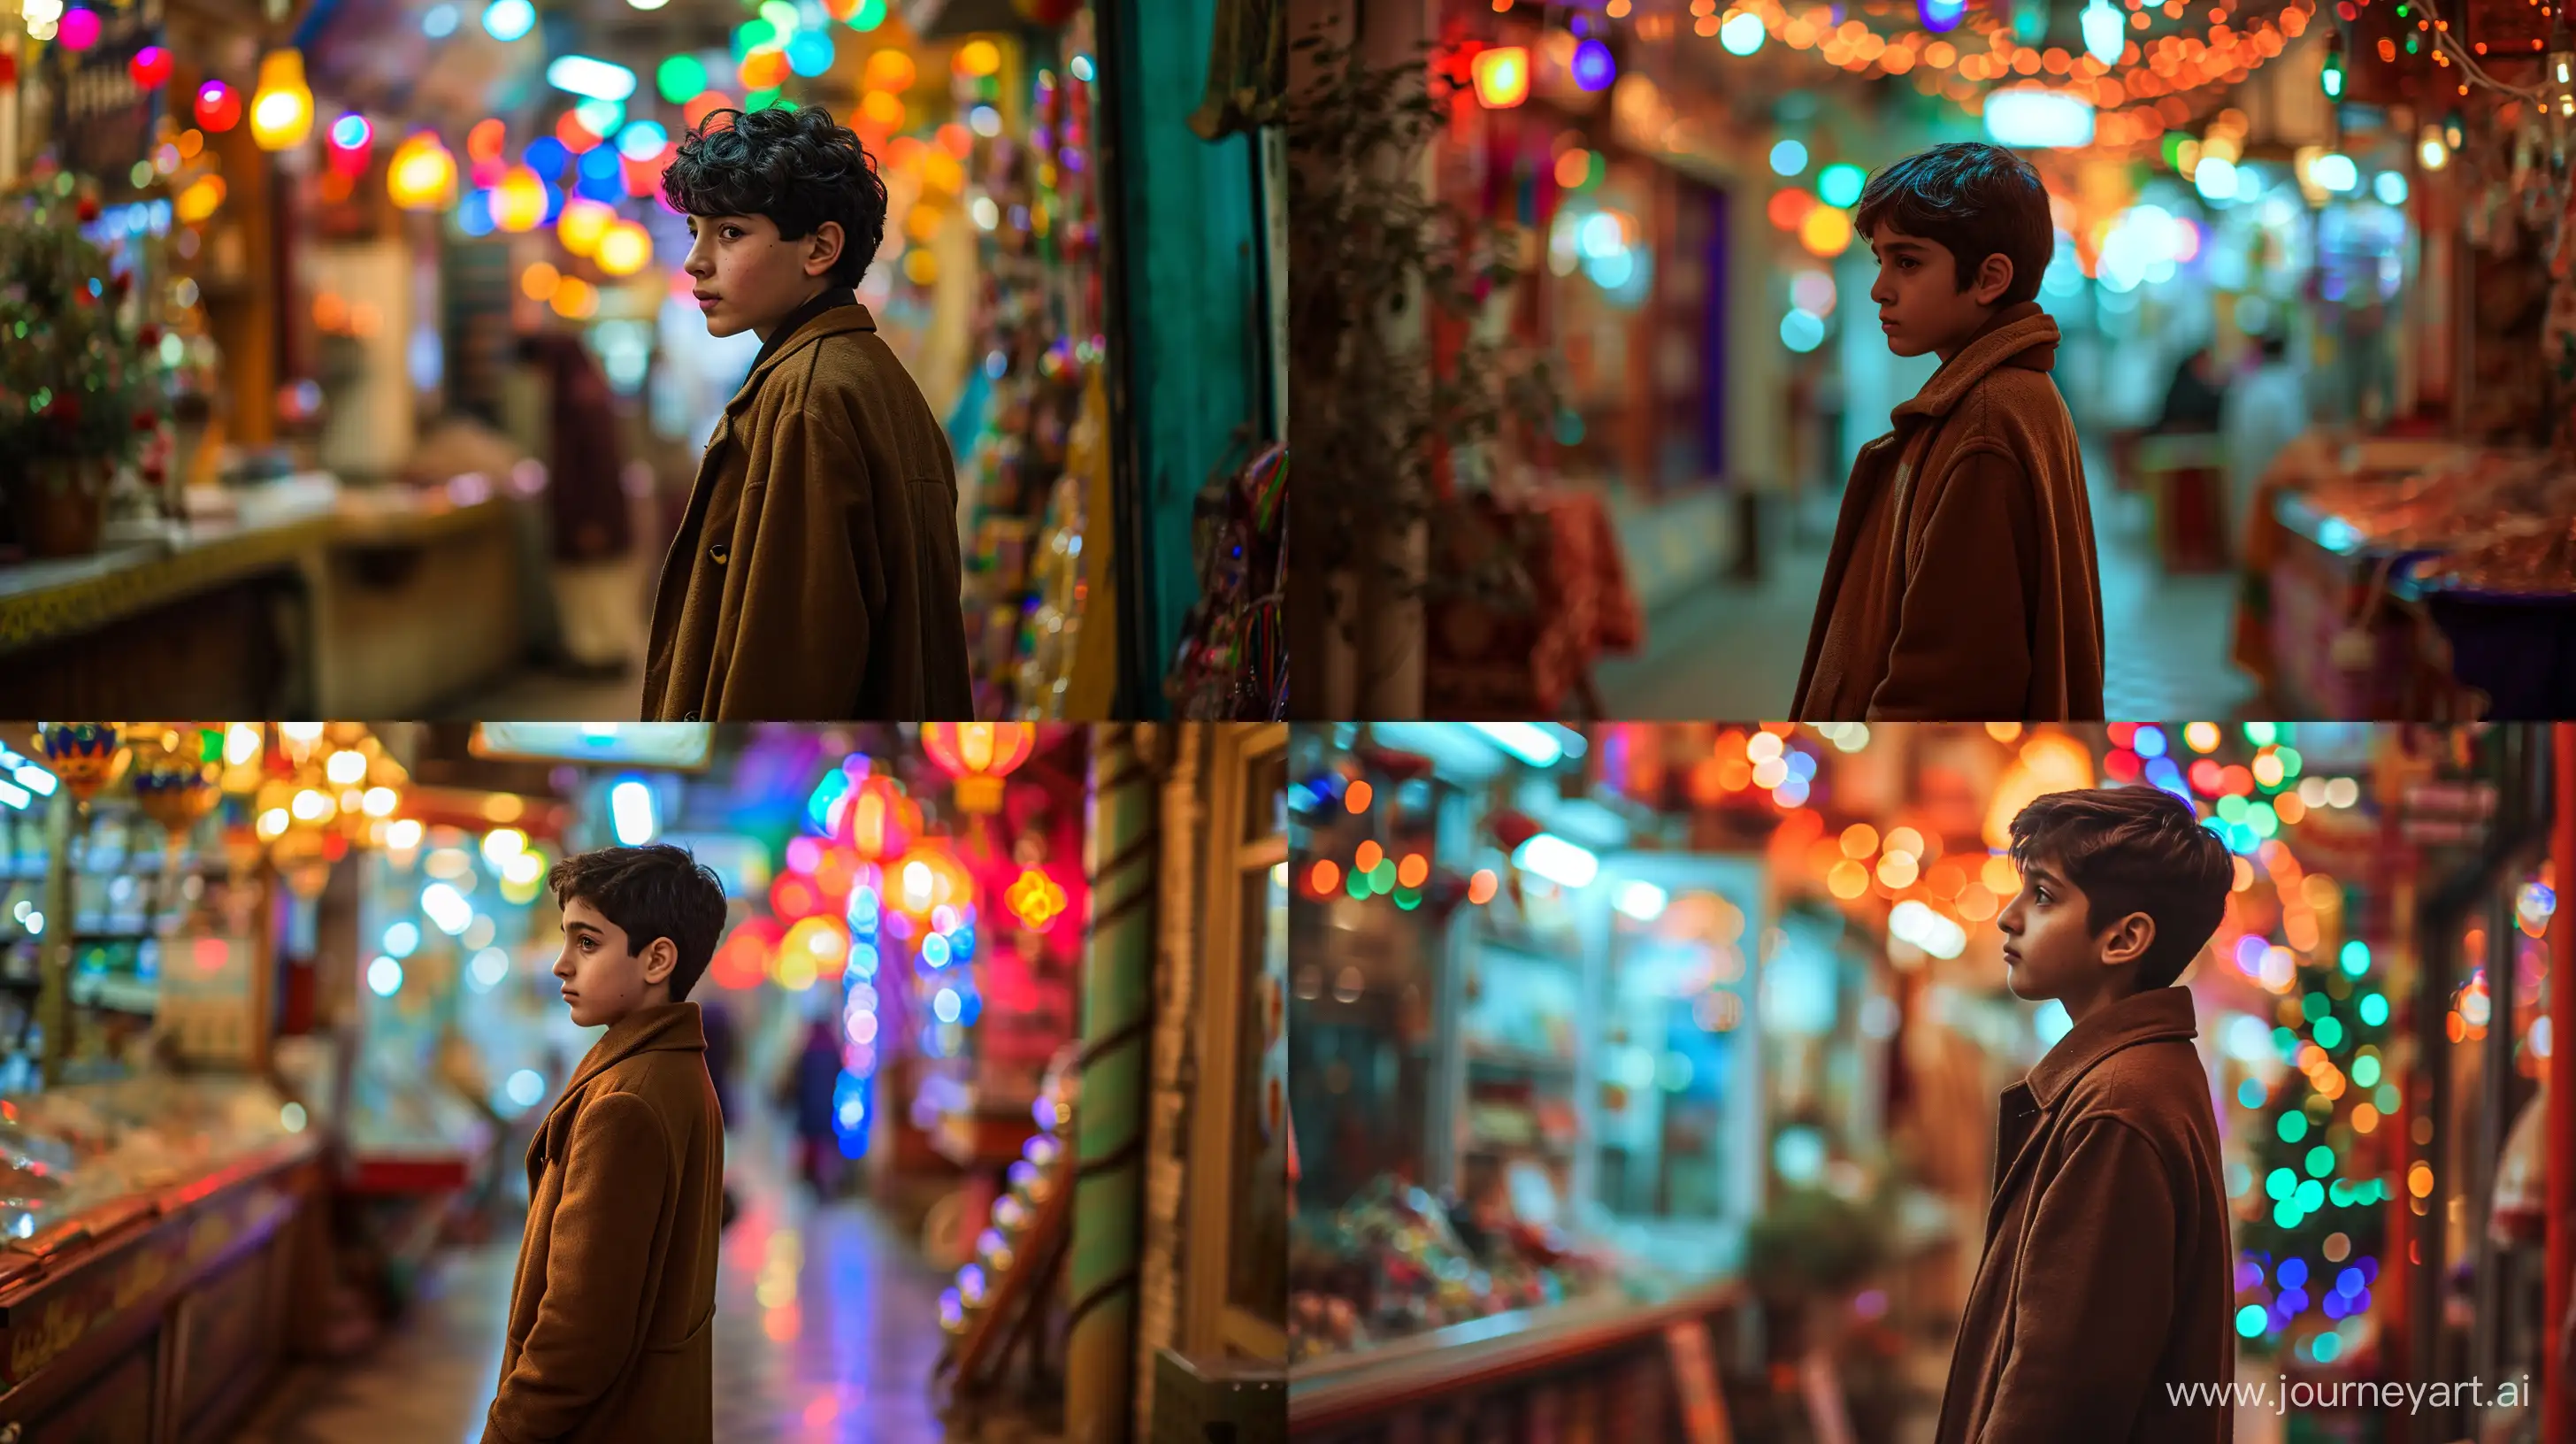 Stylish-Iranian-Teen-in-Brown-Coat-at-Vibrant-Shop